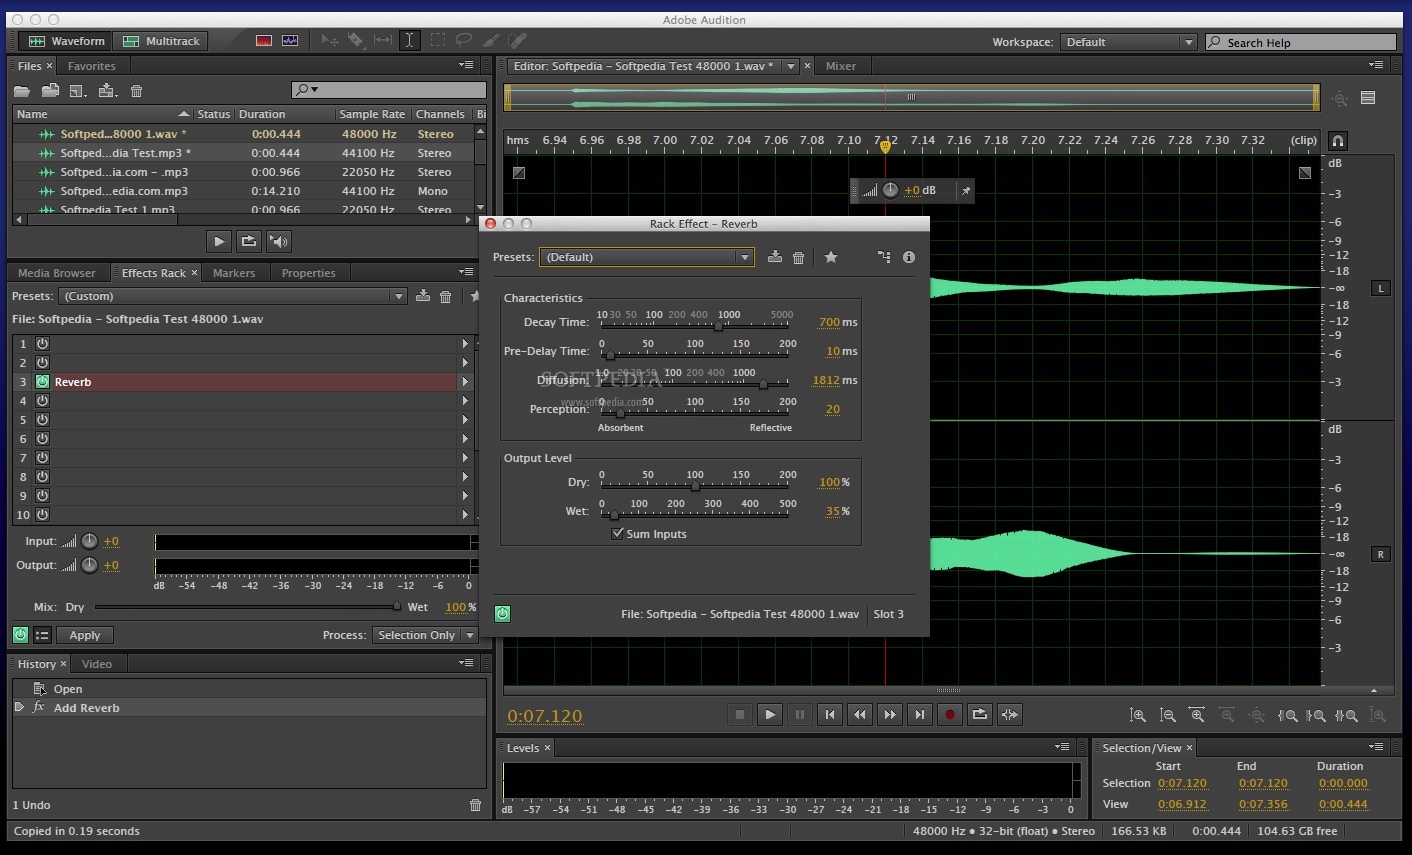 adobe audition for mac m1